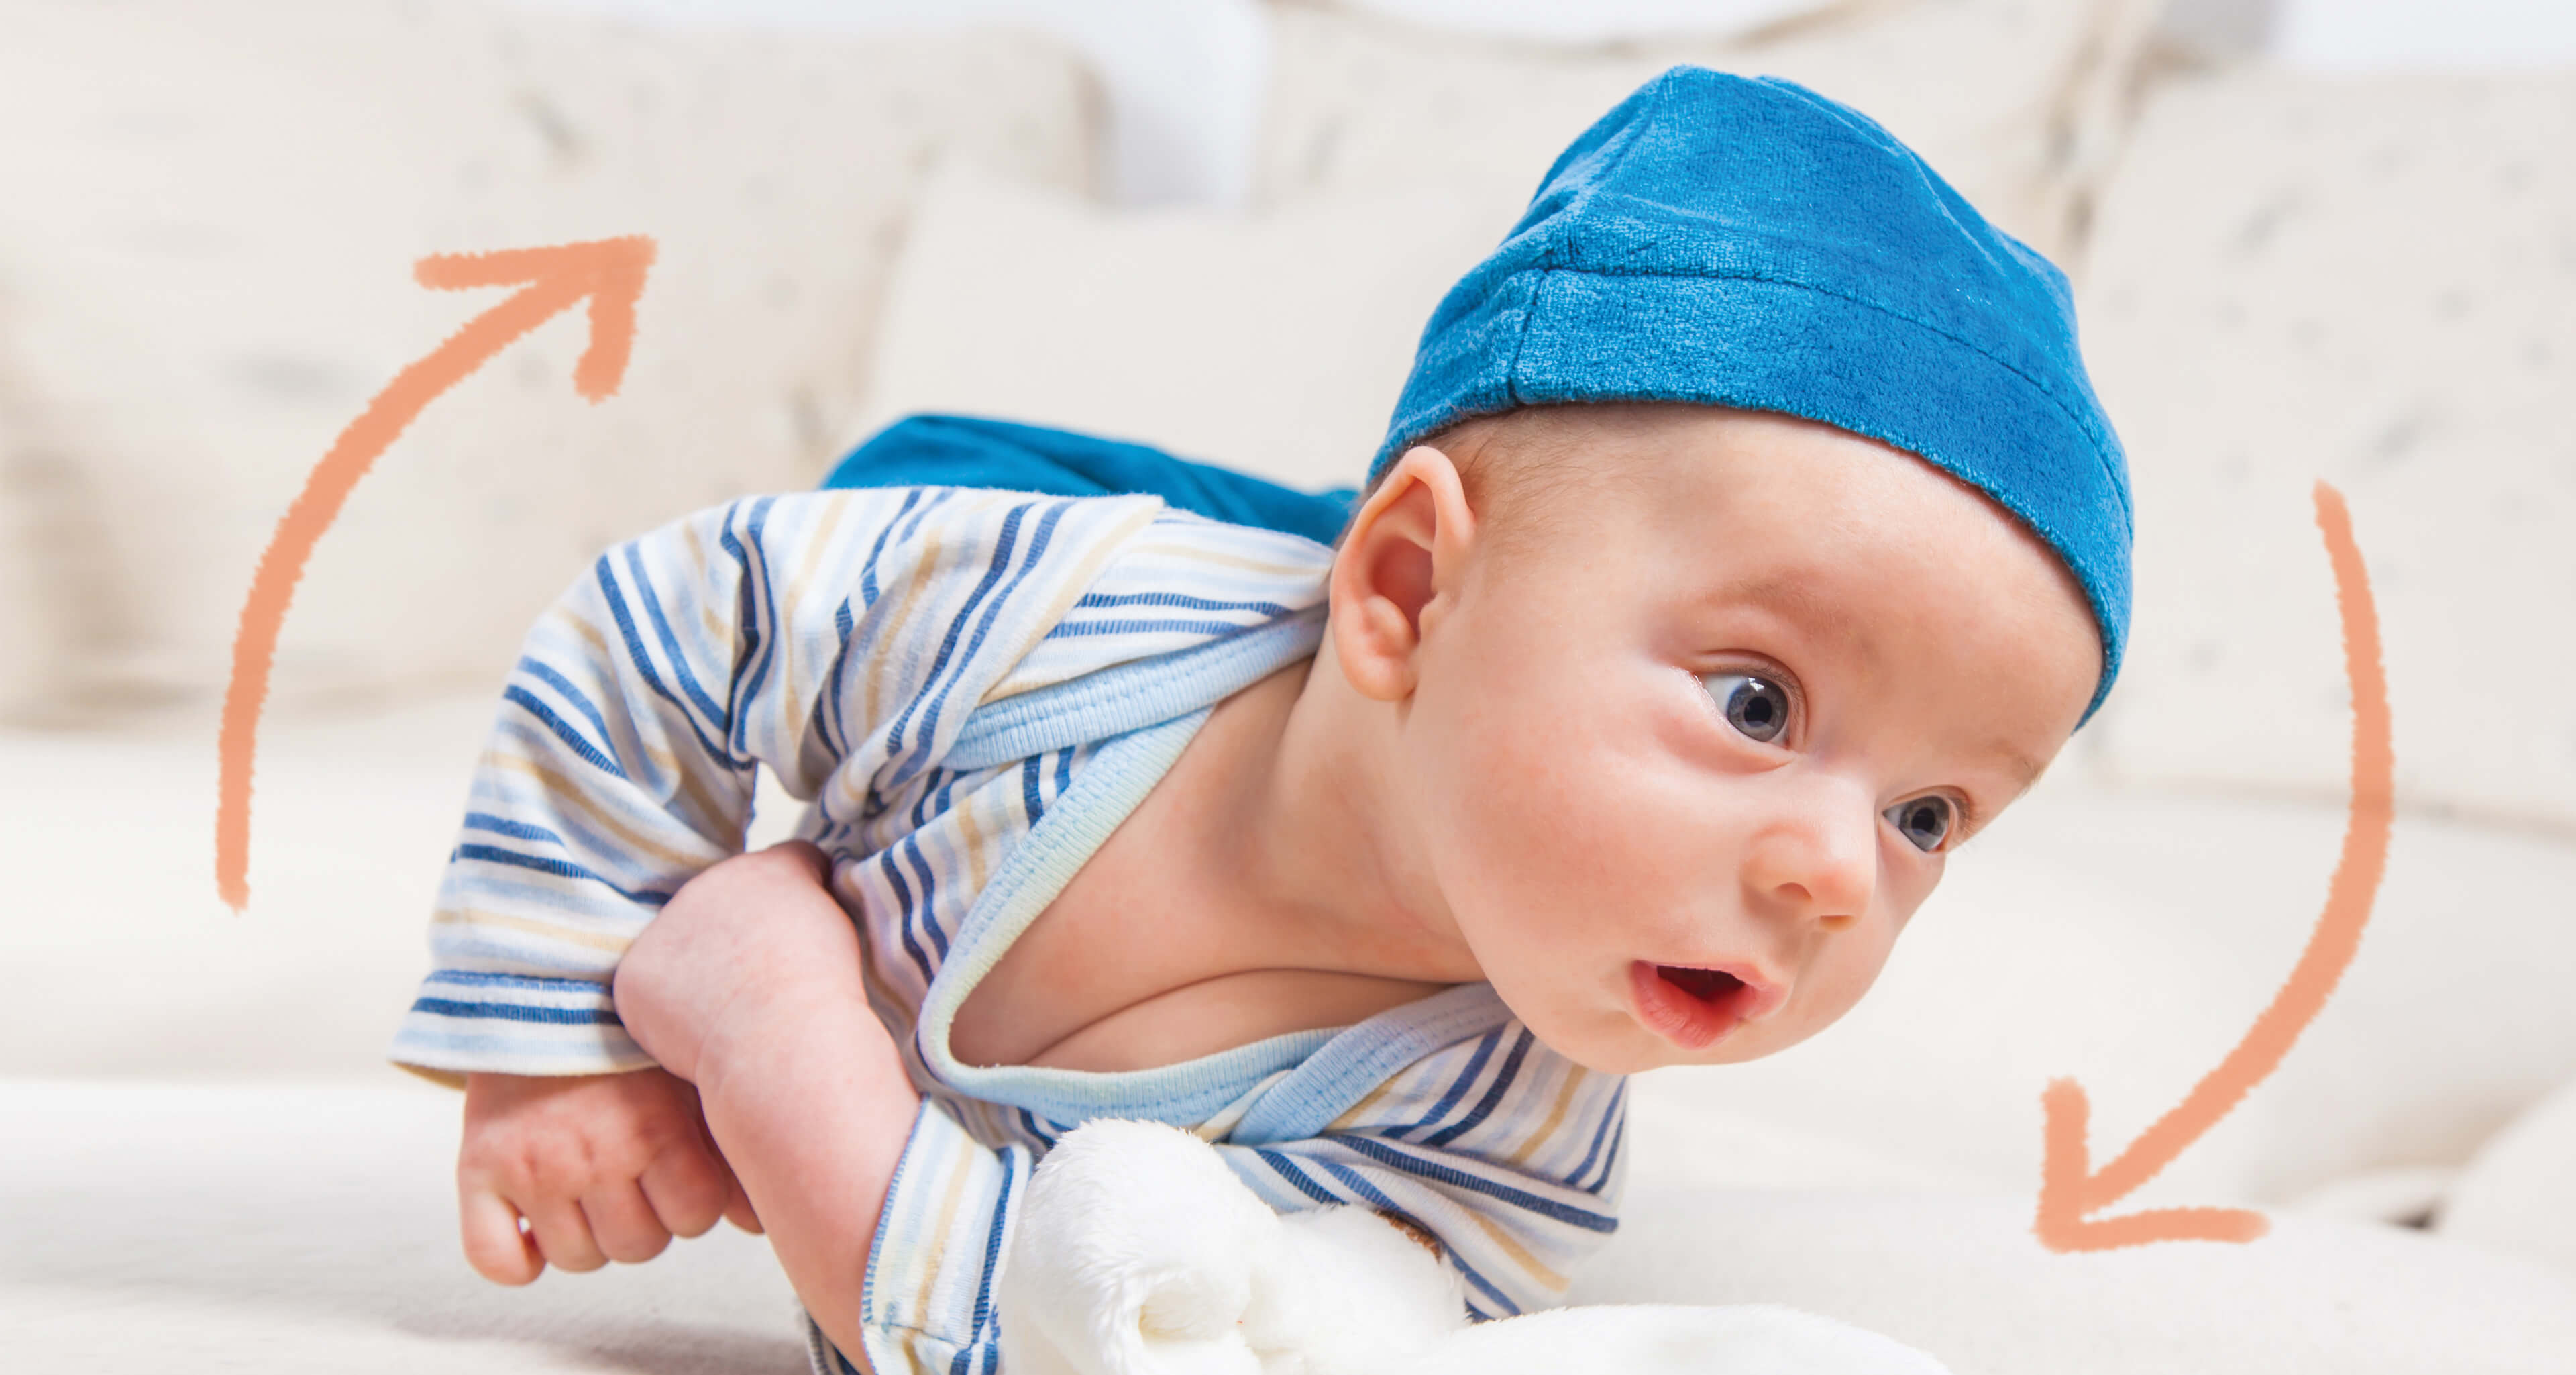 When Do Babies Roll Over? (The Answer May Surprise You